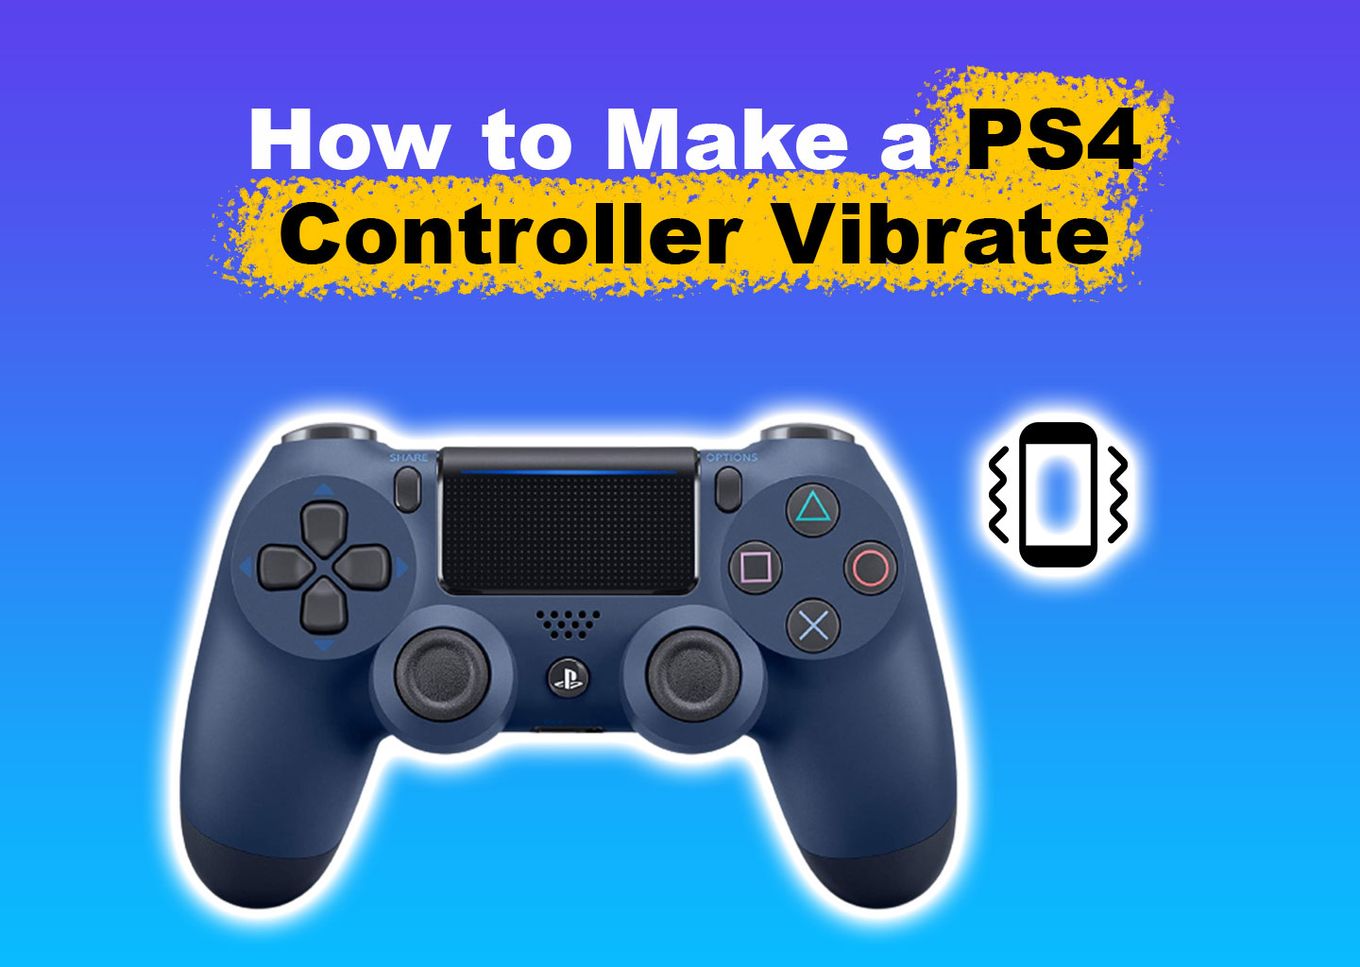 How to Make a PS4 Controller Vibrate.